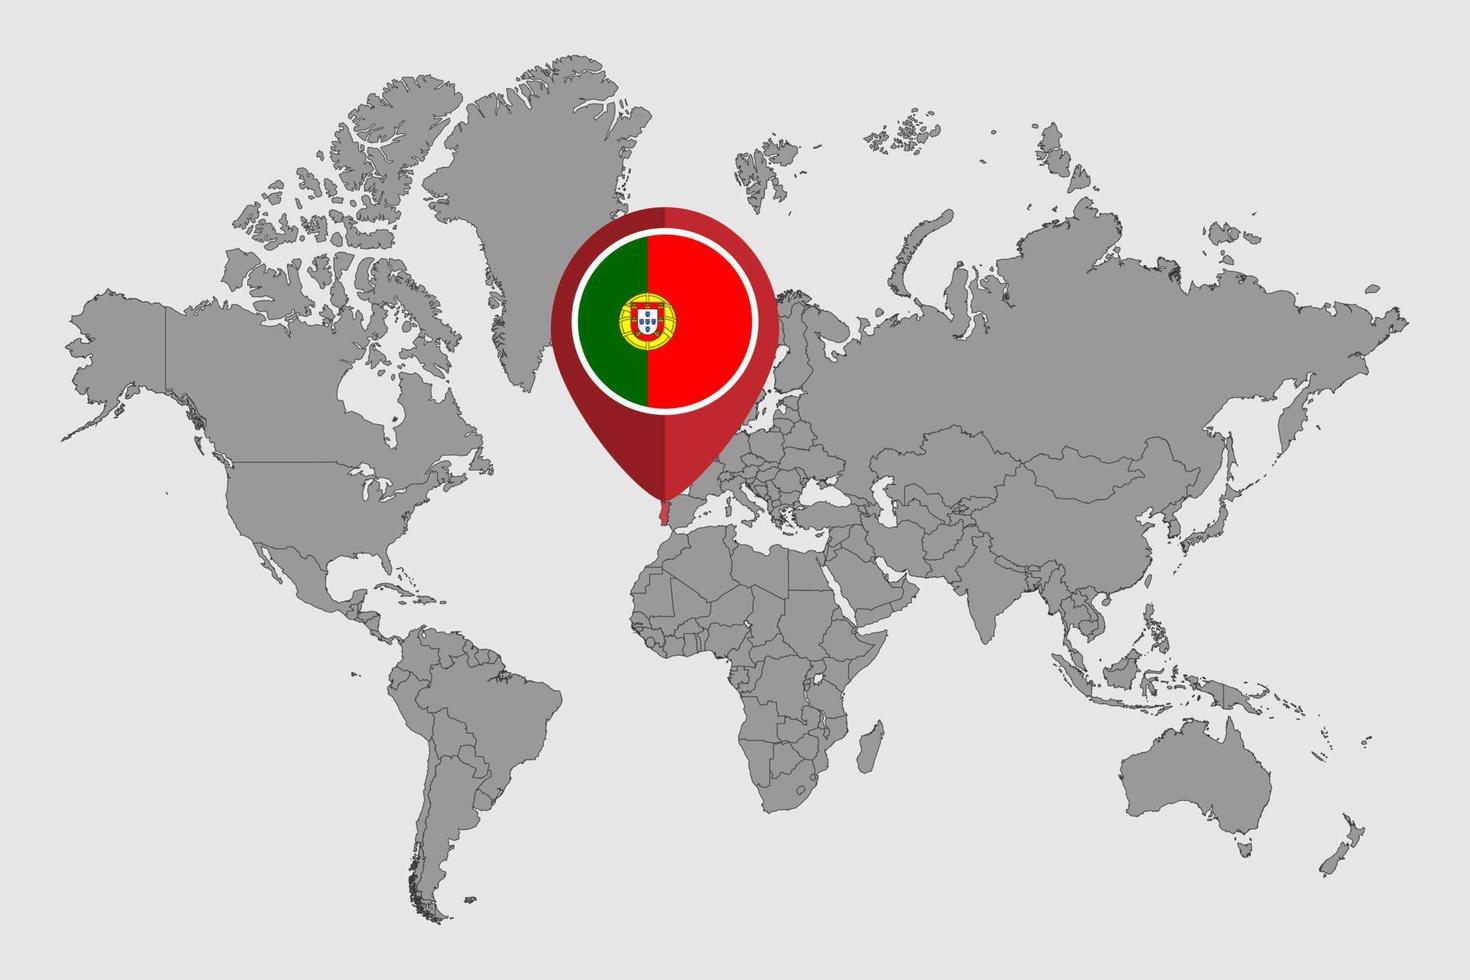 Pin map with Portugal flag on world map. Vector illustration